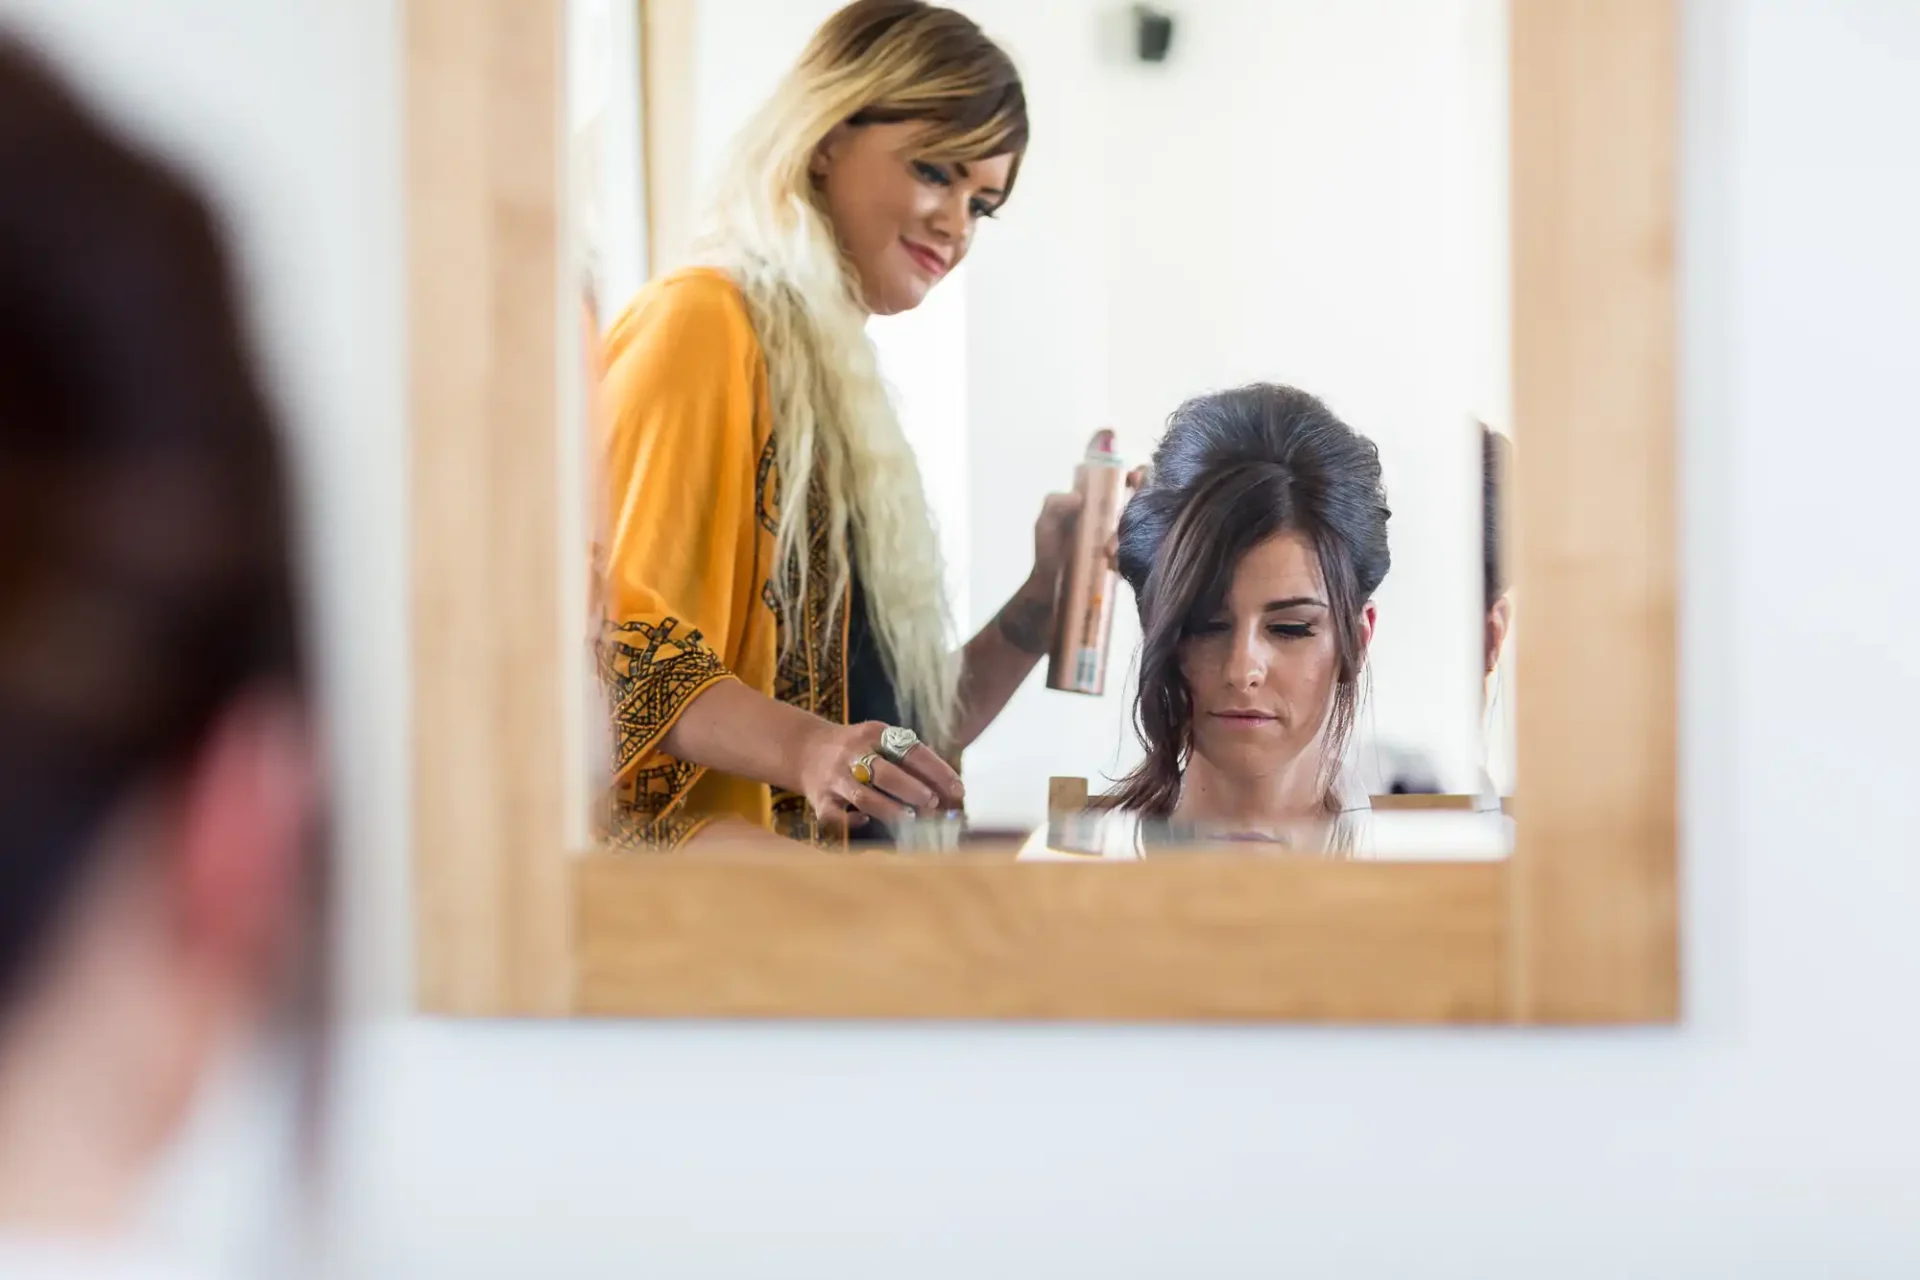 A hairstylist sprays a product on a woman's hair, both reflected in a mirror in a brightly lit salon.